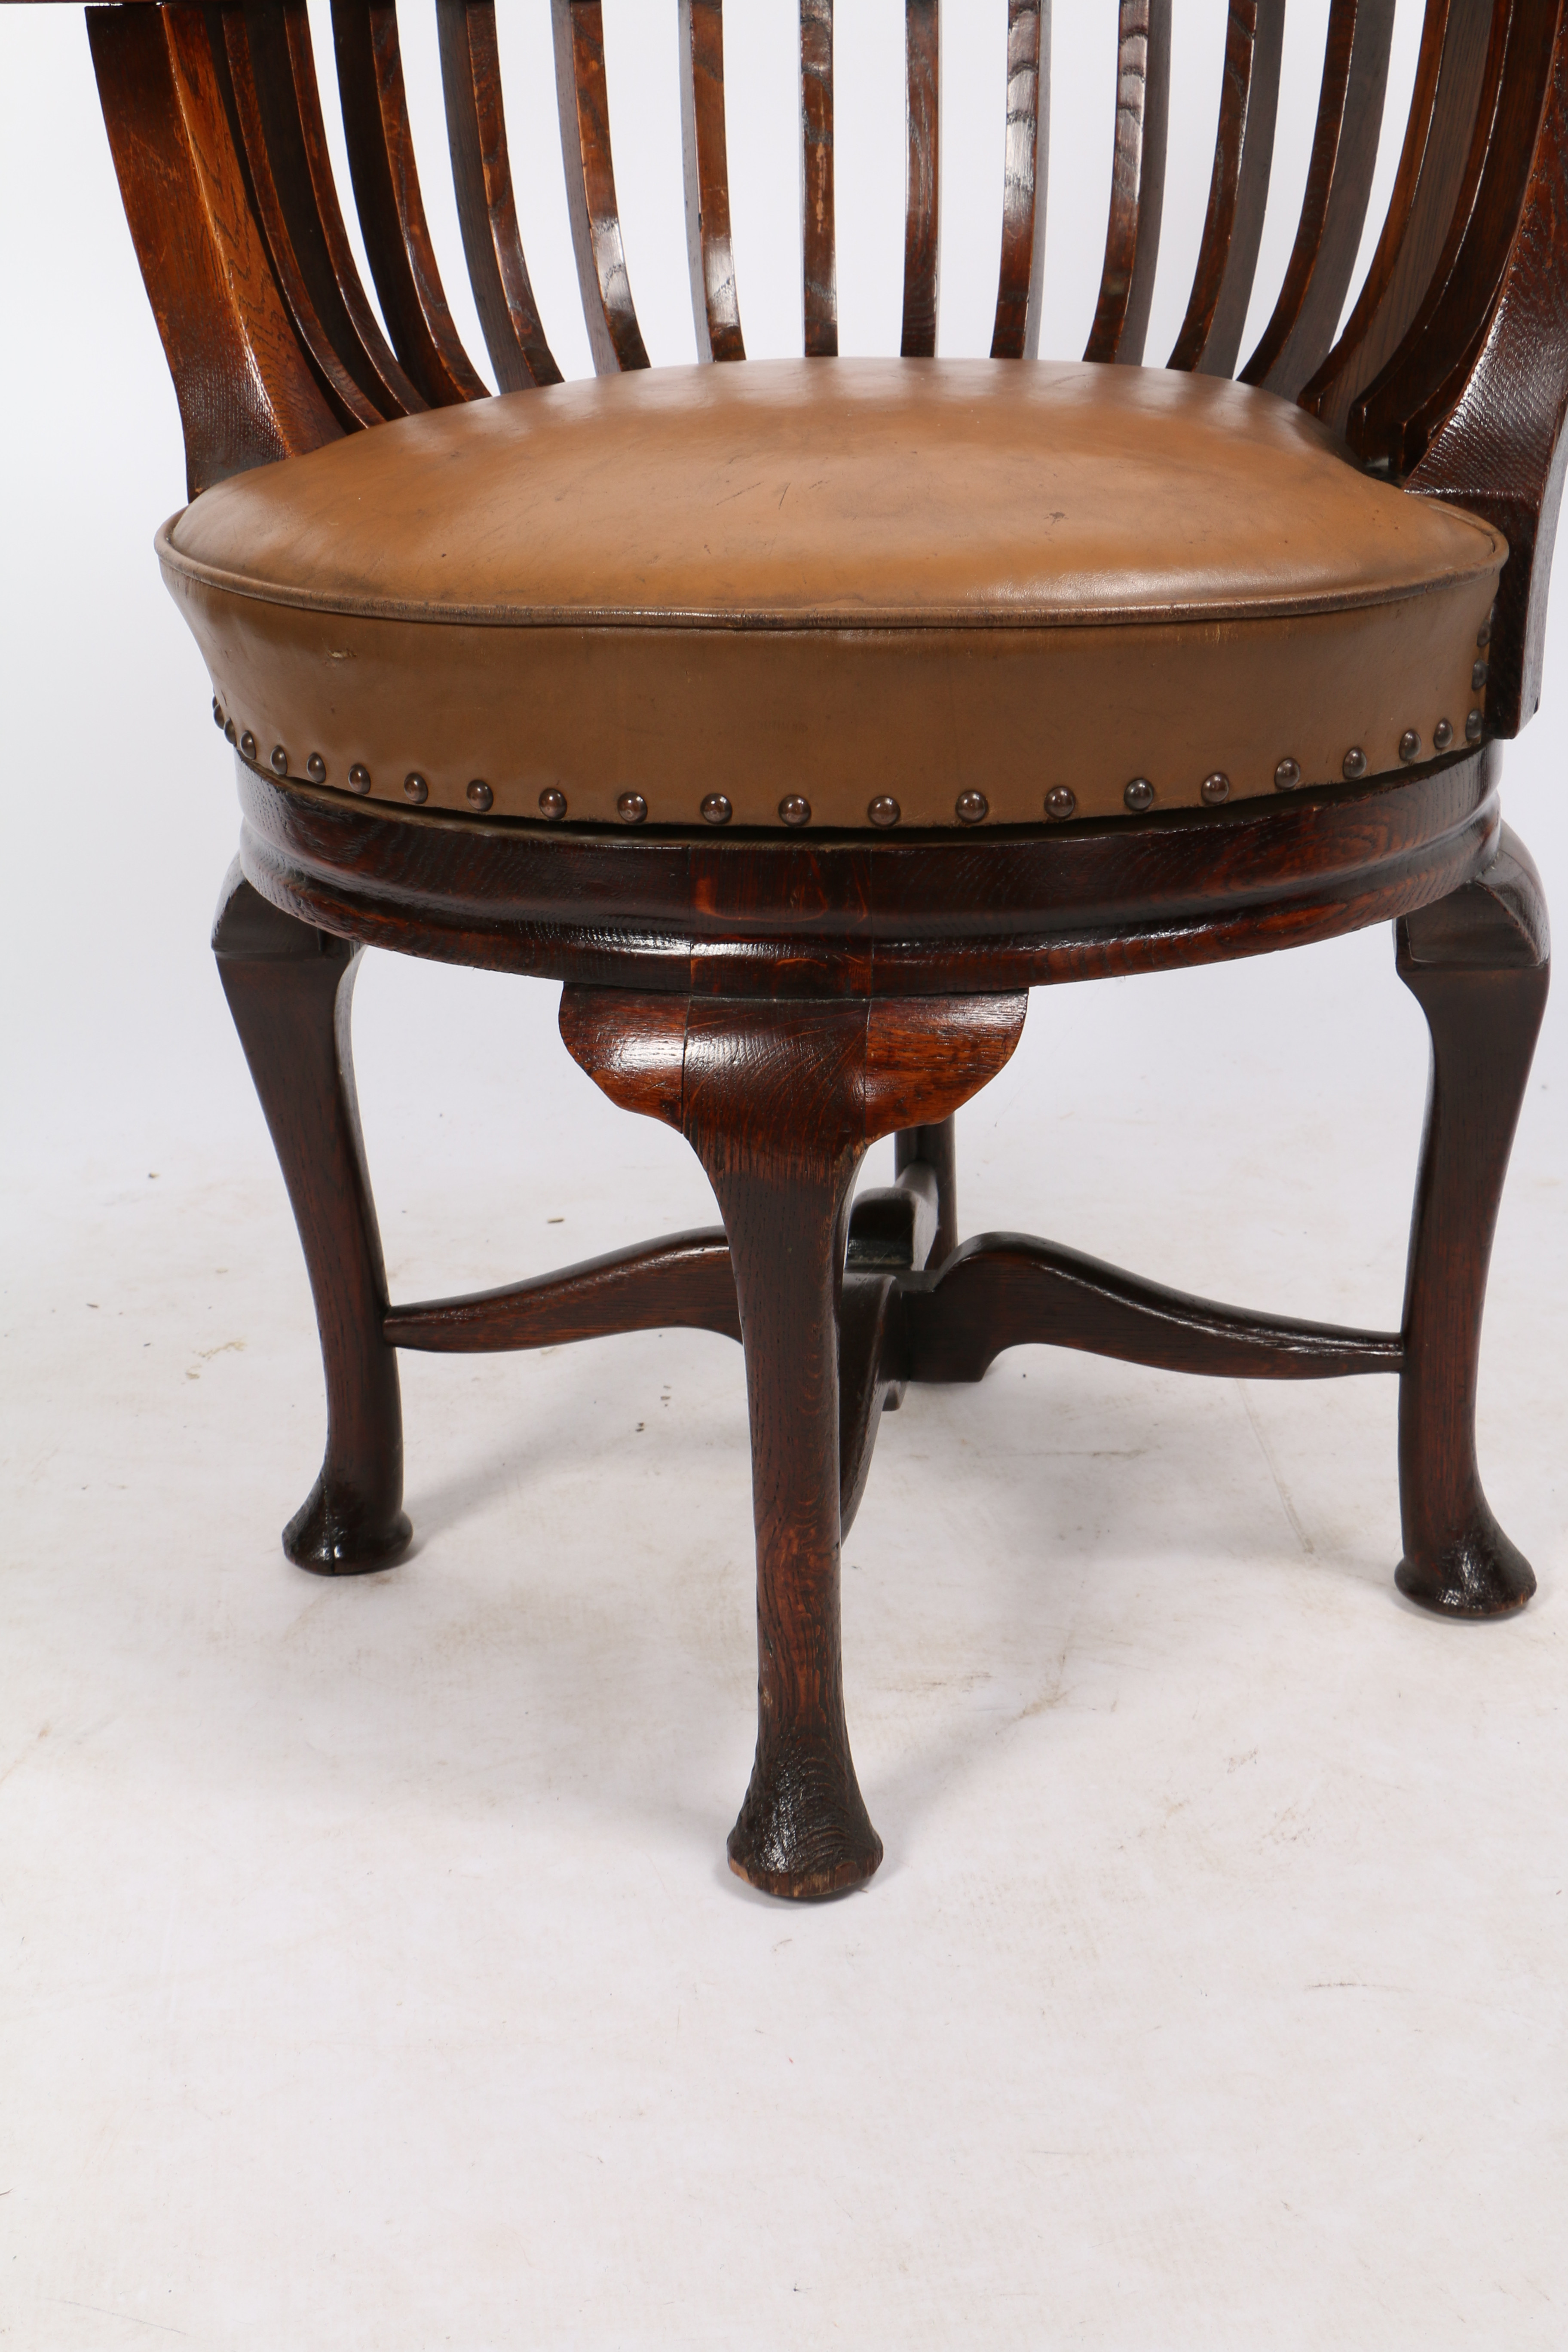 AN EARLY 20TH CENTURY OAK AND LEATHER CAPTAIN'S SWIVEL DESK CHAIR. - Image 4 of 7